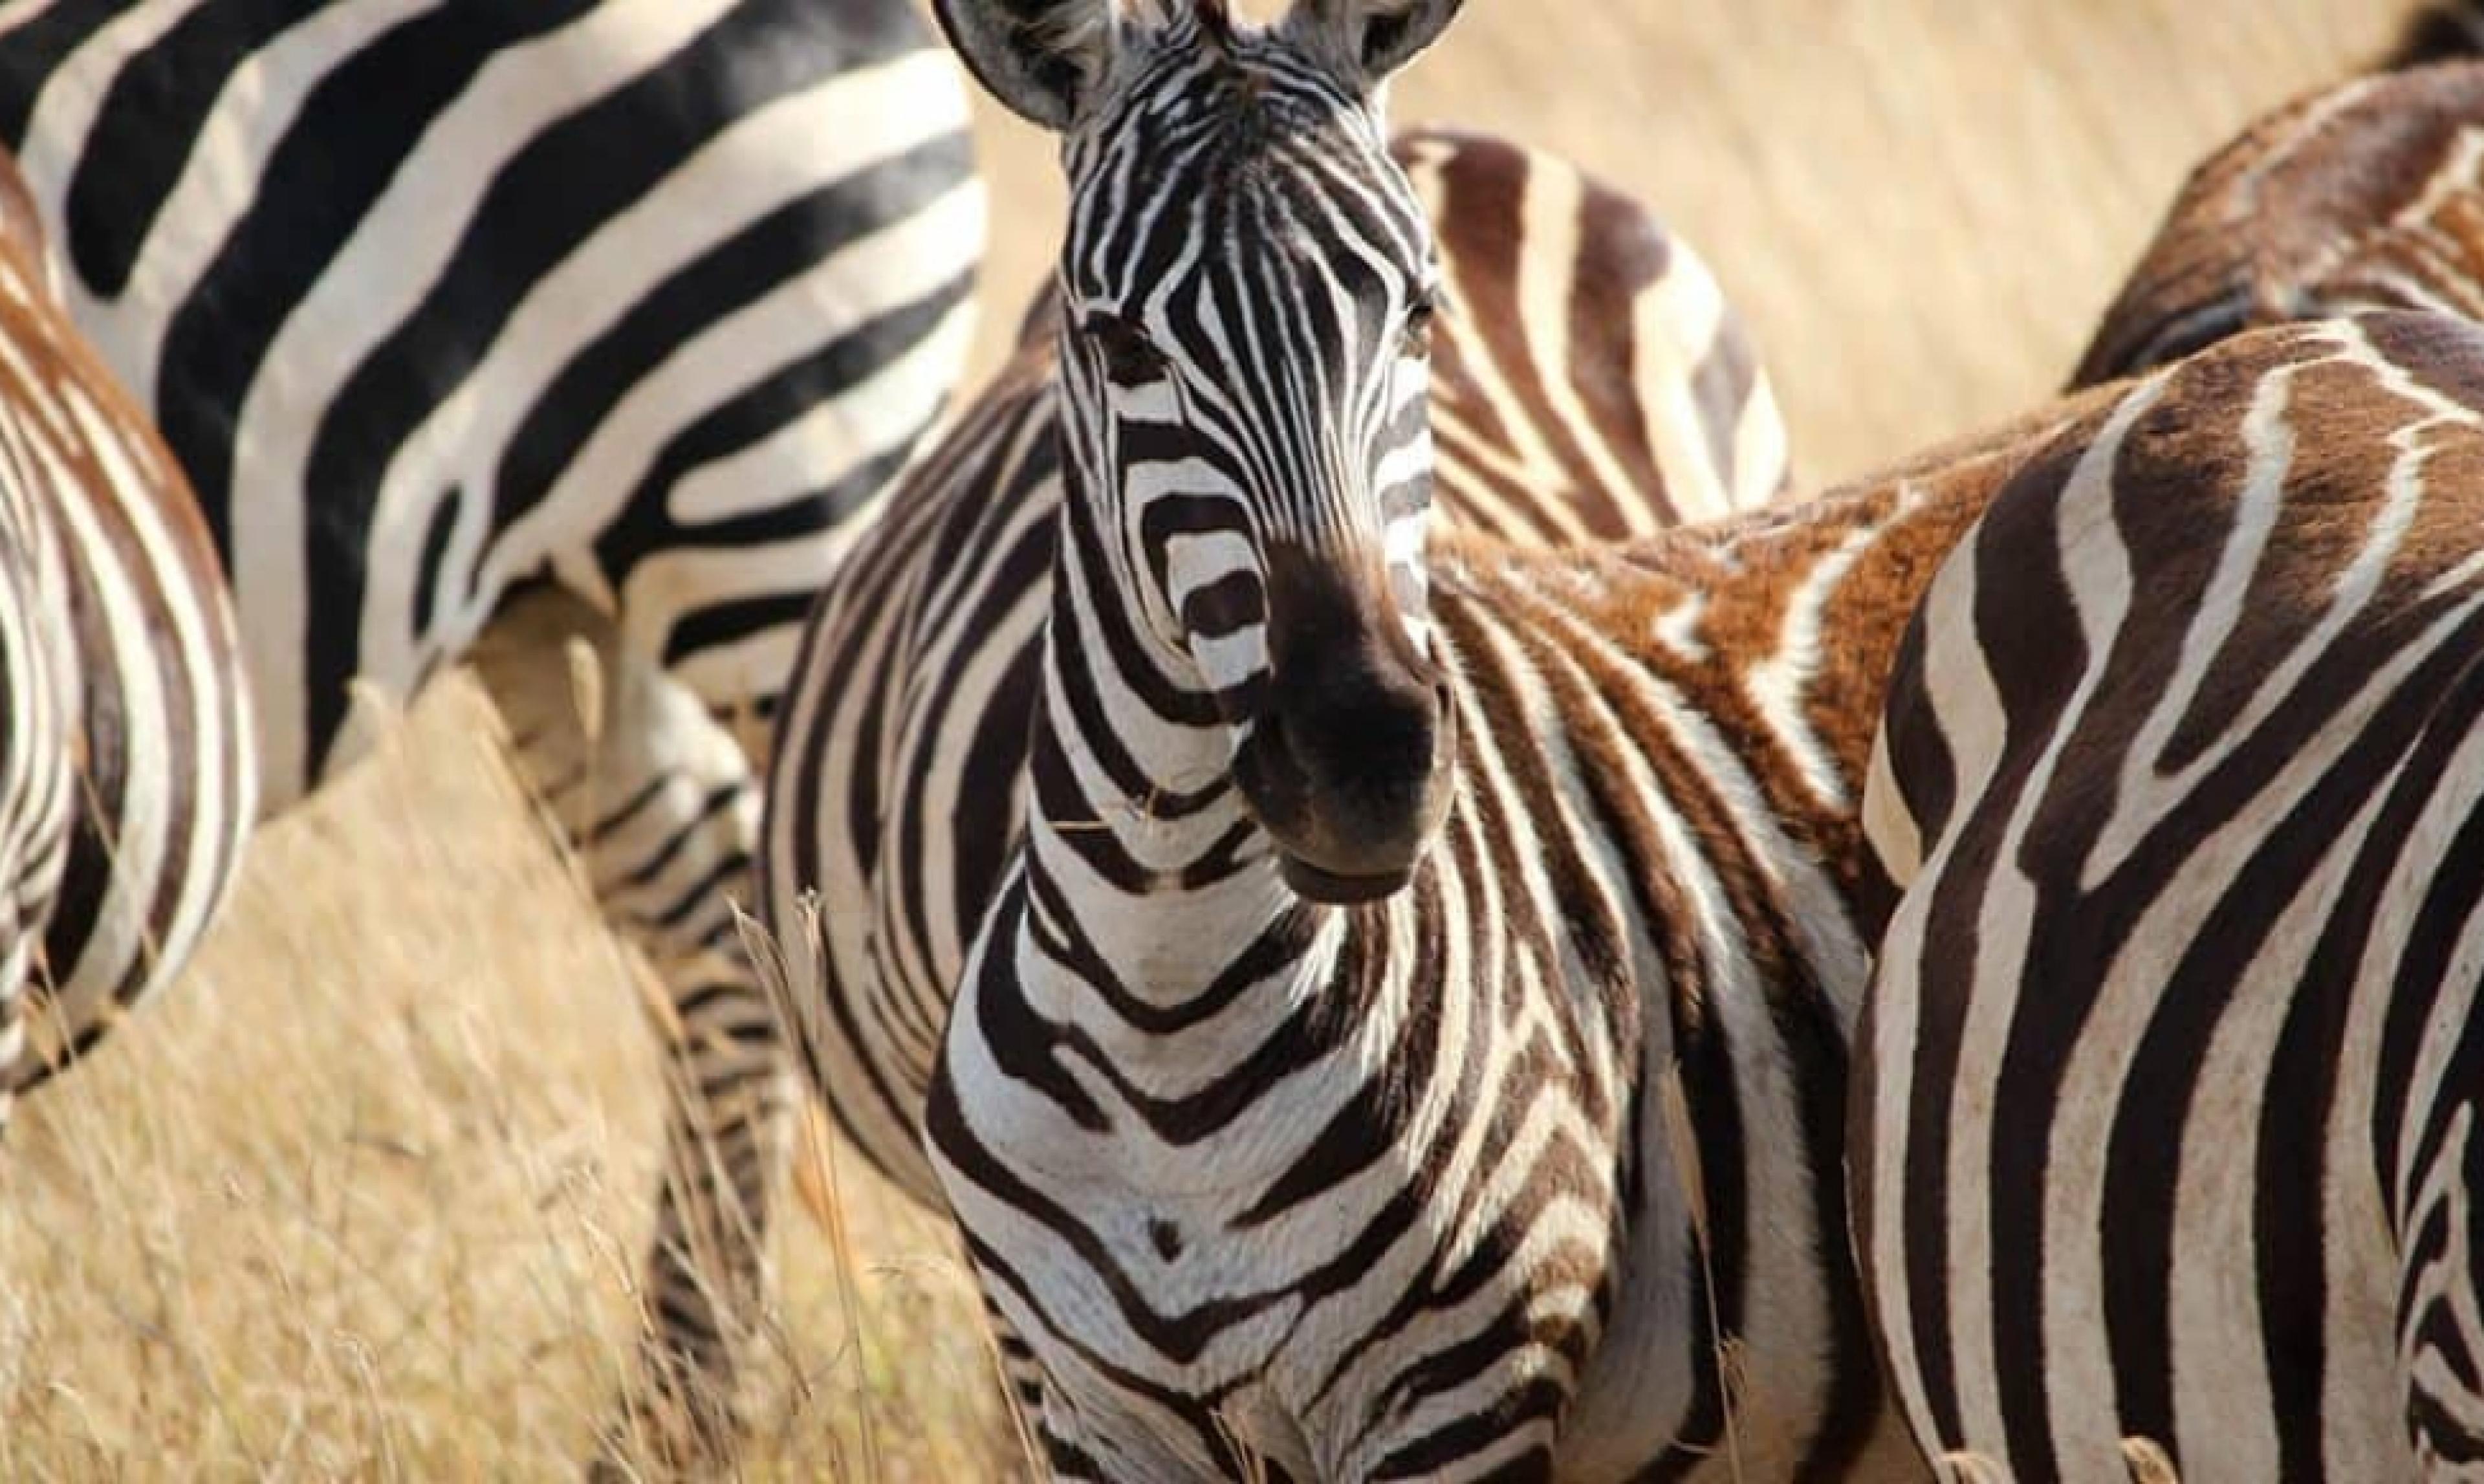 1 zebra facing the camera and side view of 2 additional zebras